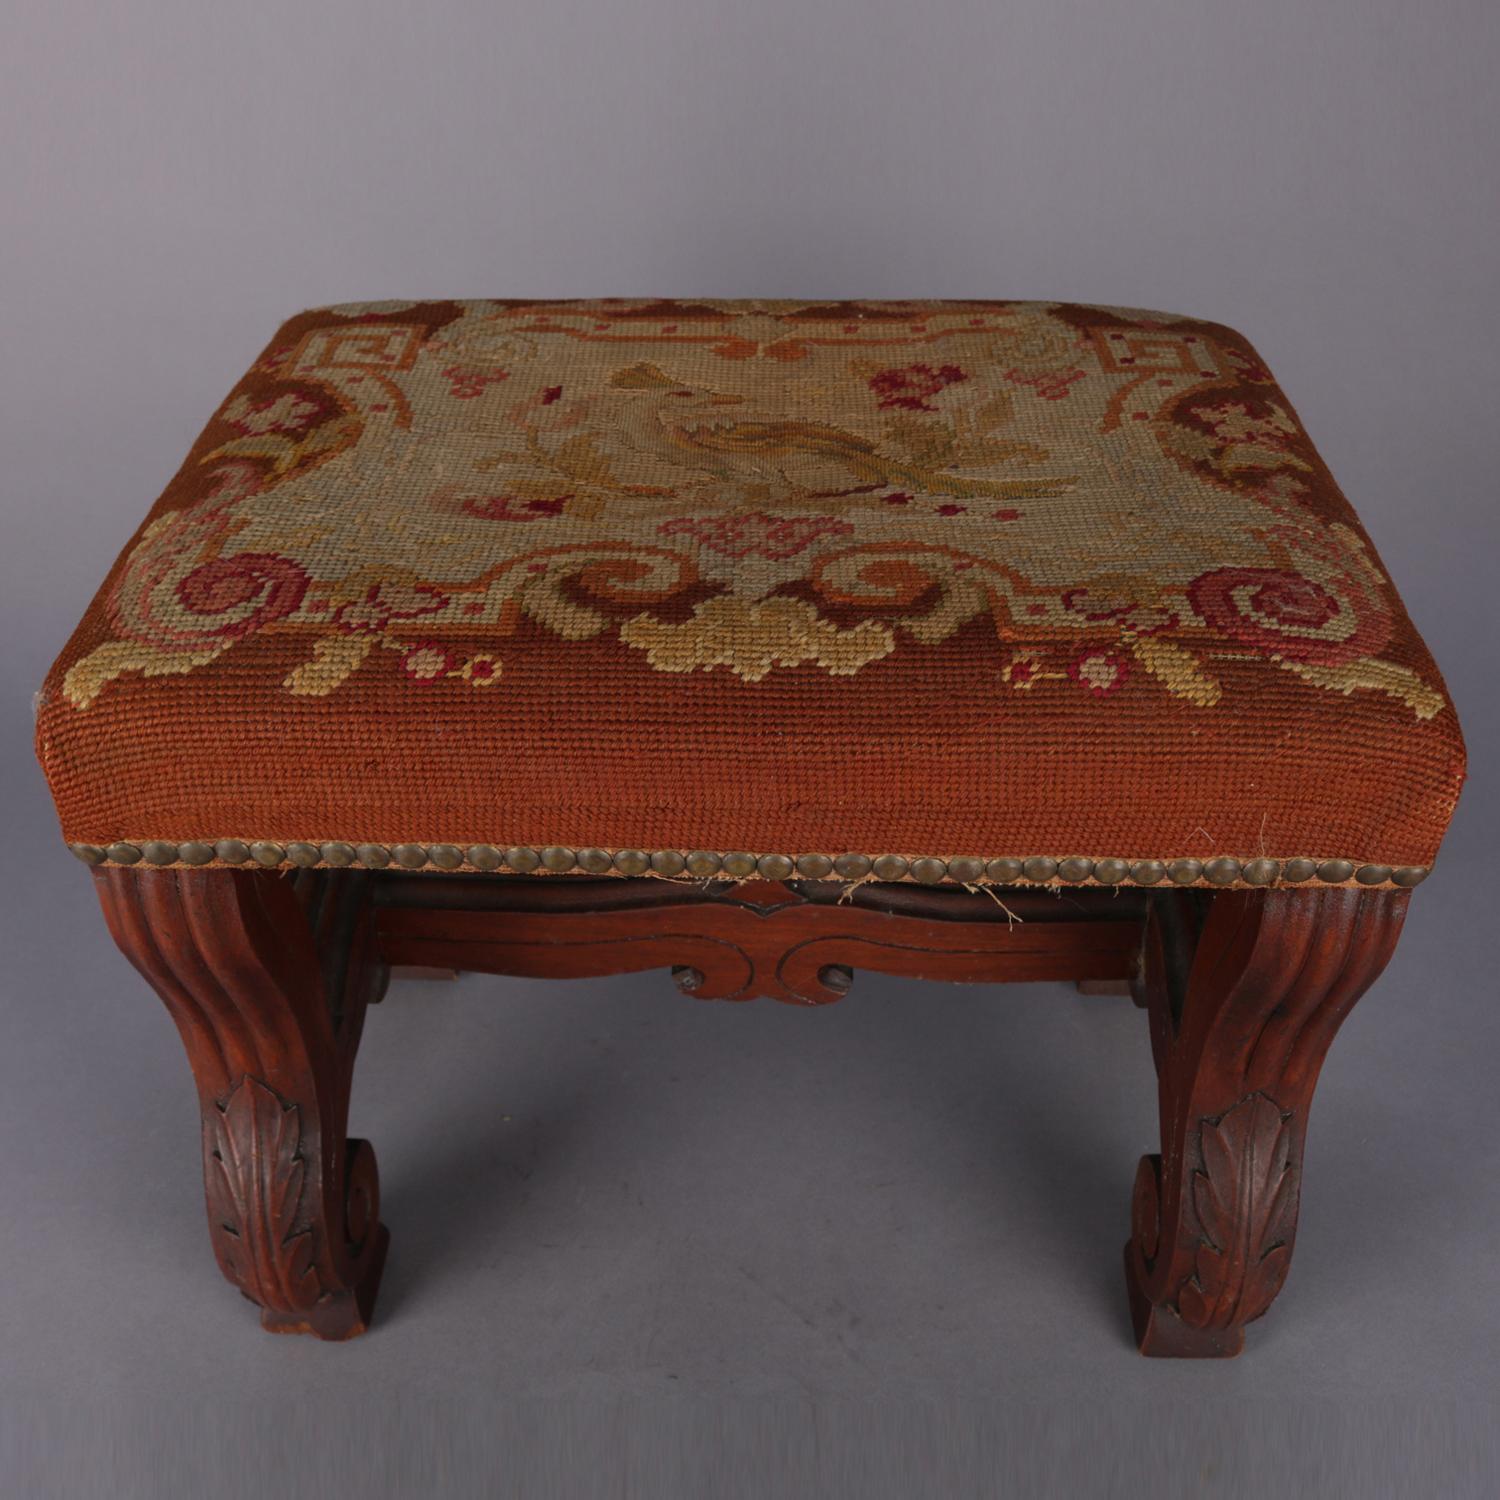 Eastlake Antique Continental Carved Walnut and Tapestry Footstool, circa 1850